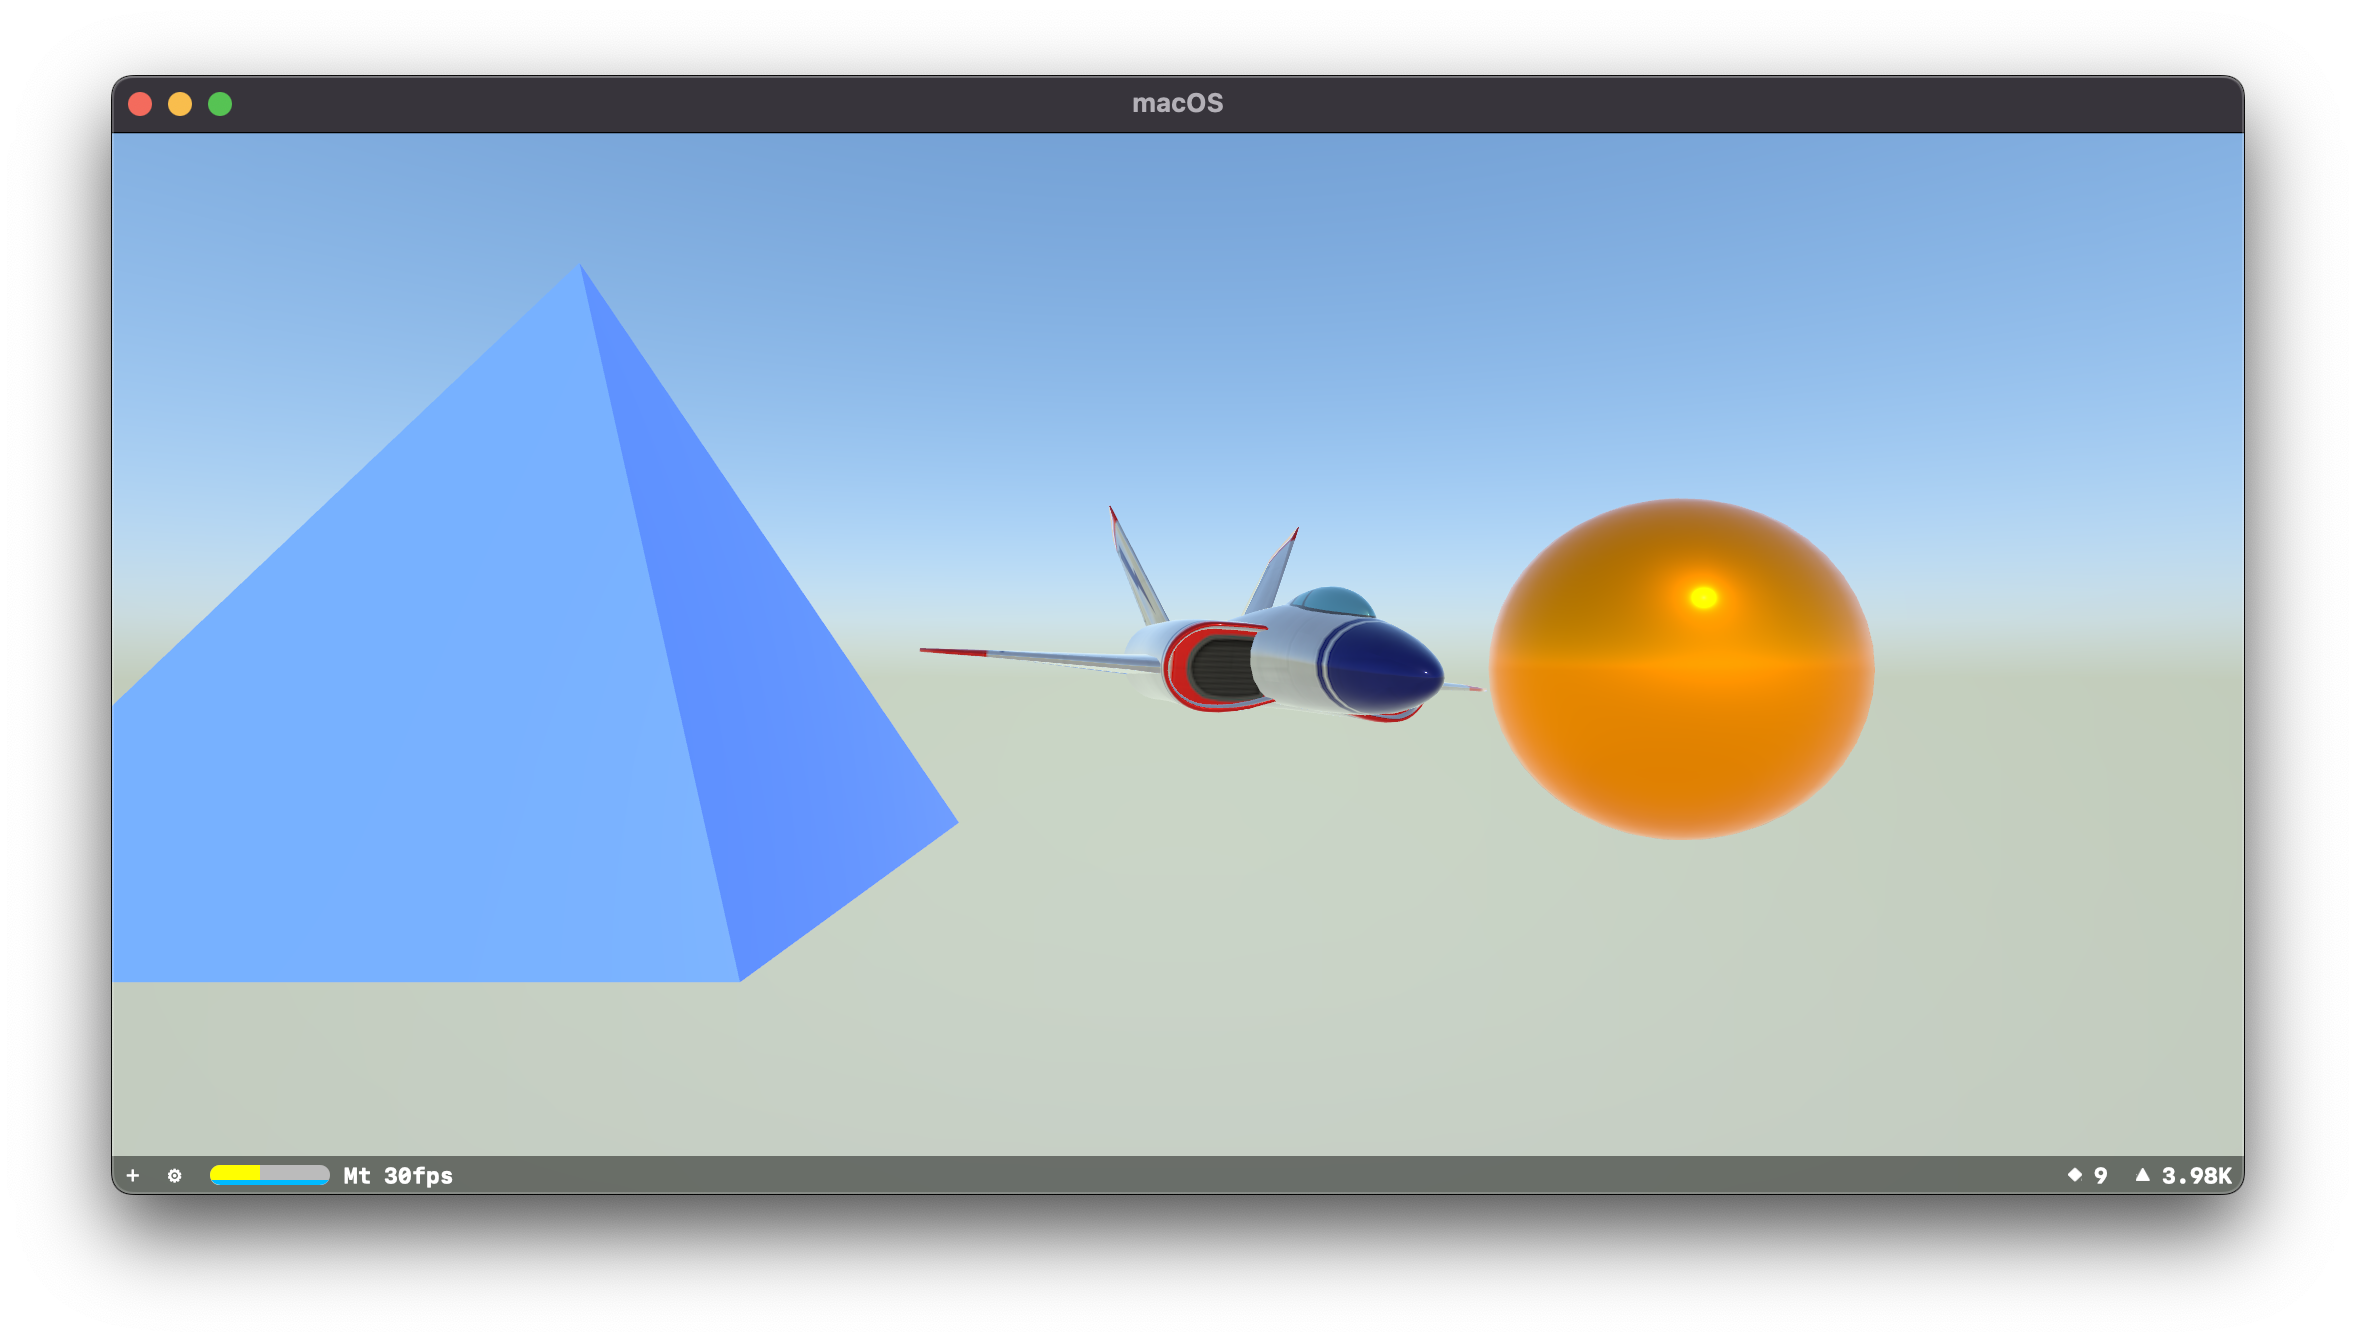 A SceneKit scene that has the default jet model, and two simple objects